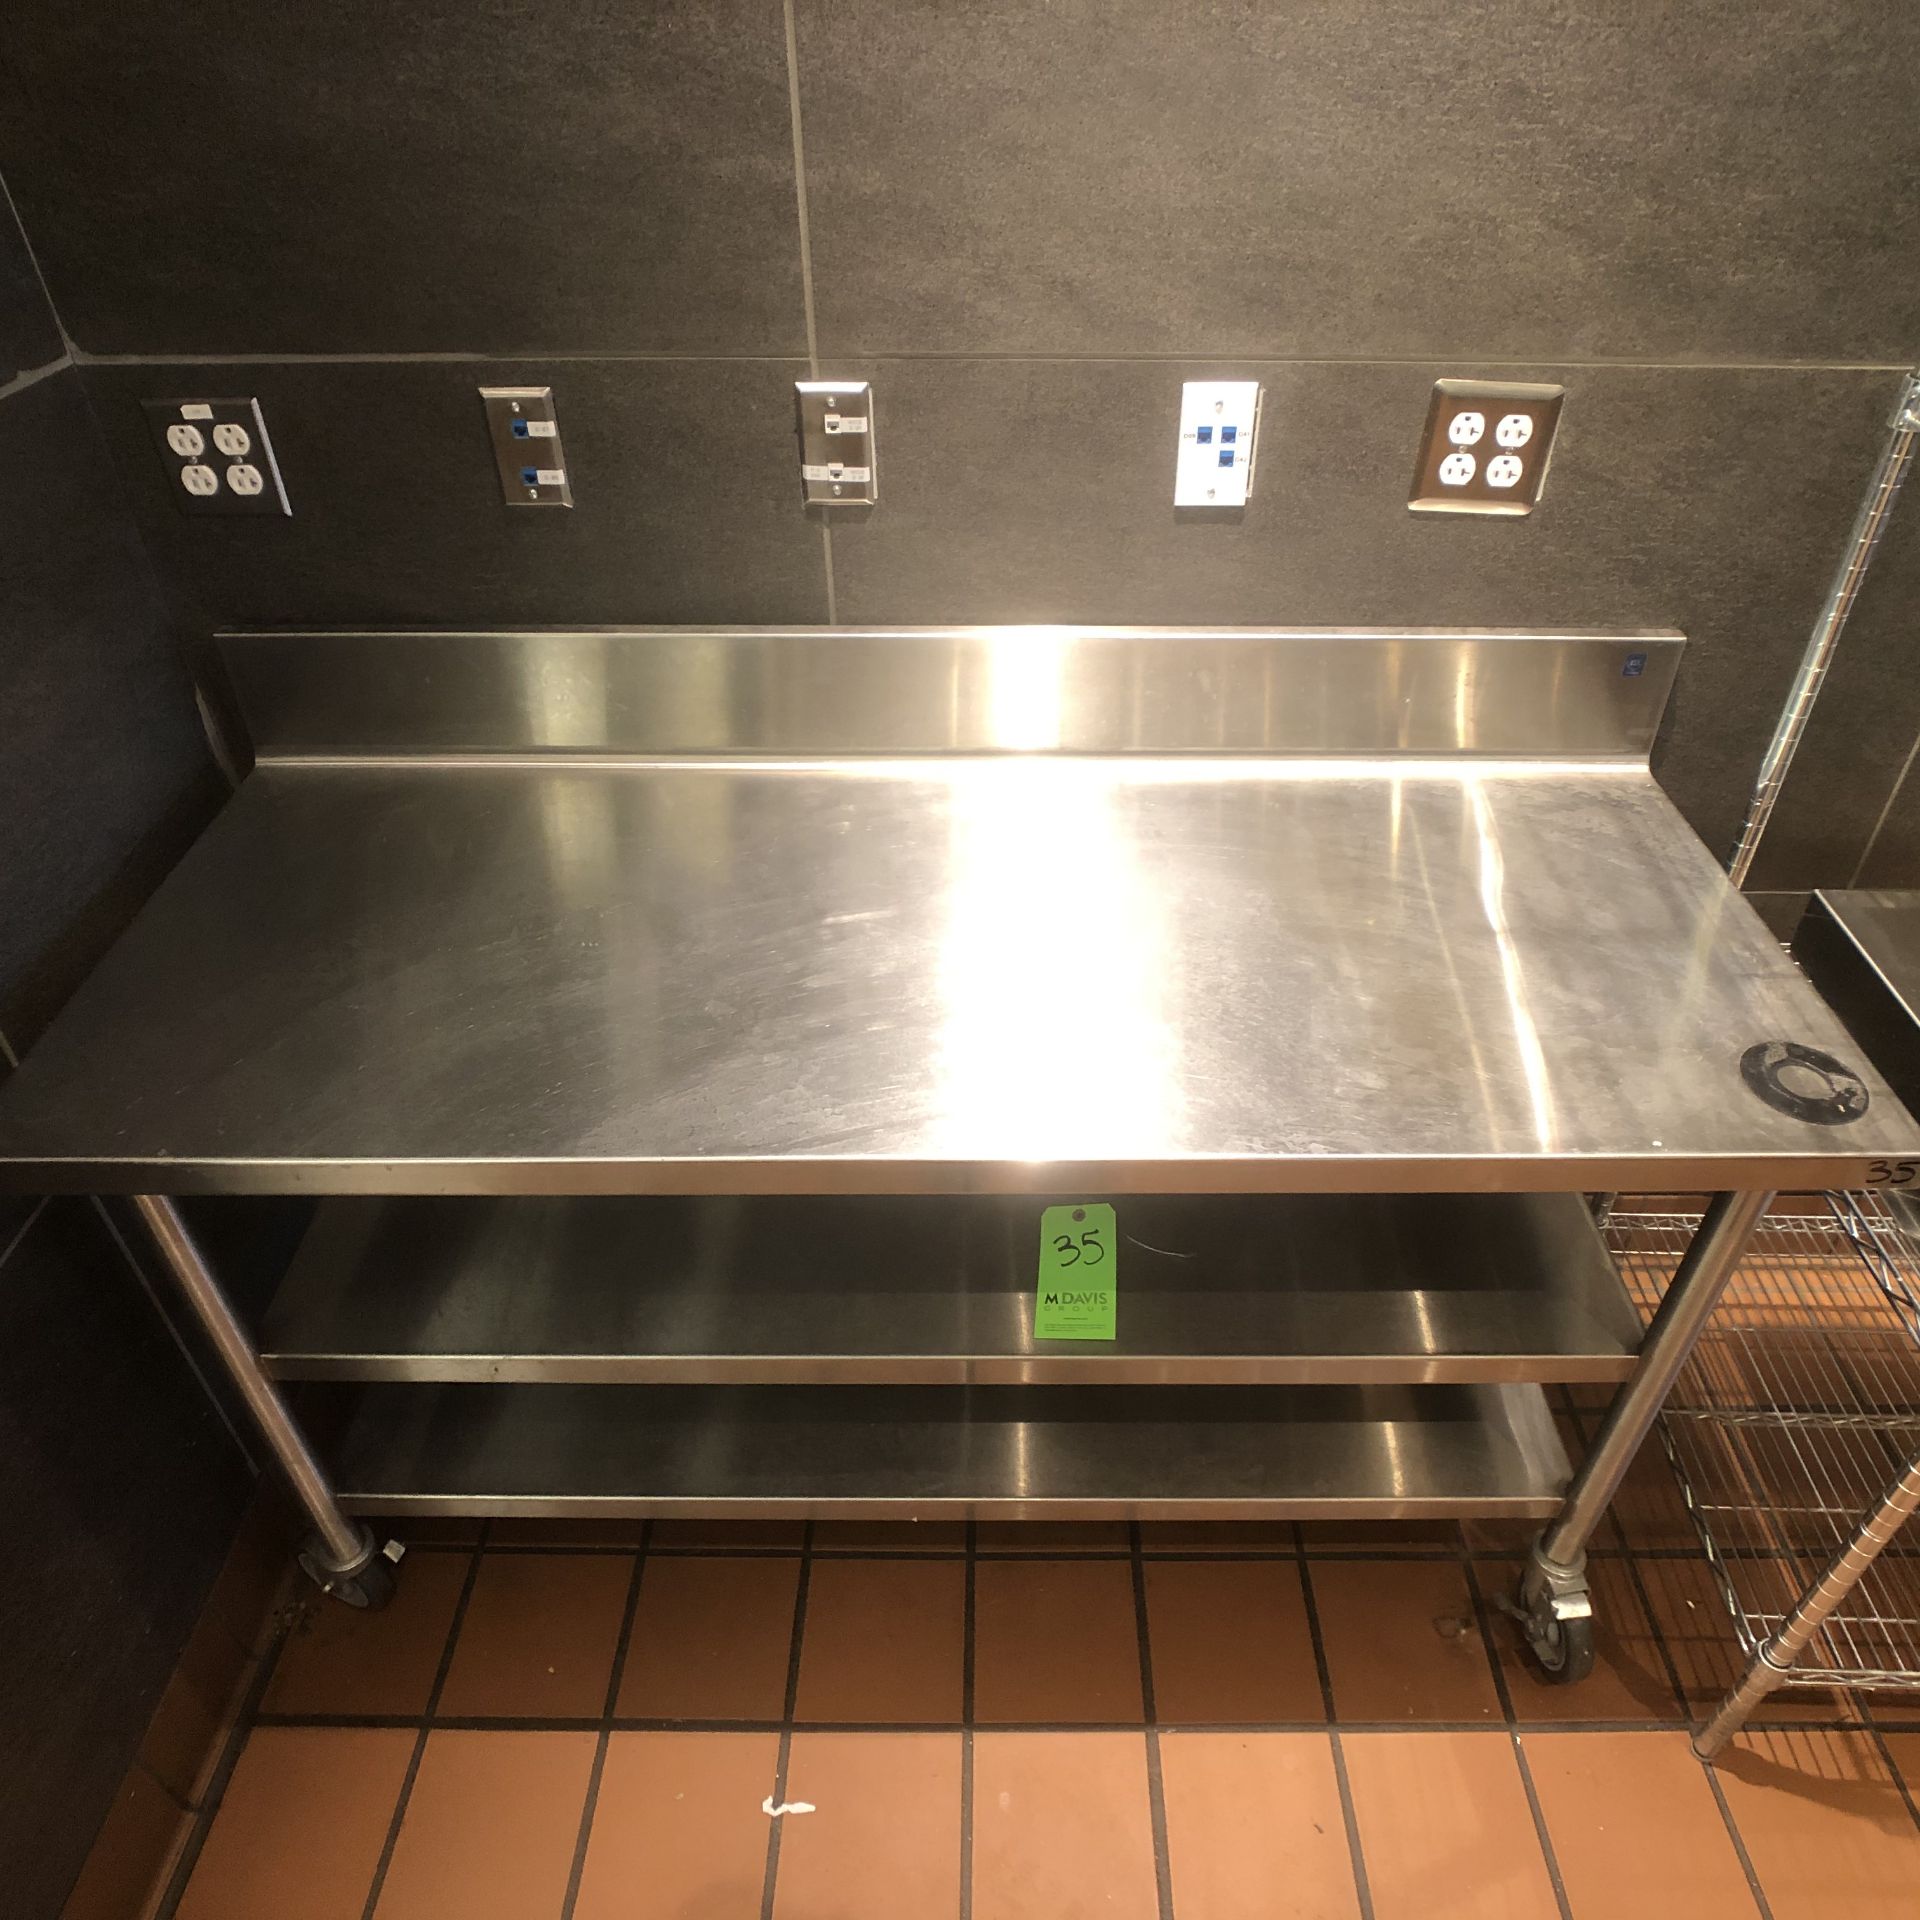 Approx. 5' L x 2" W S/S Portable Table with S/S Backsplash and Shelves - Image 3 of 3